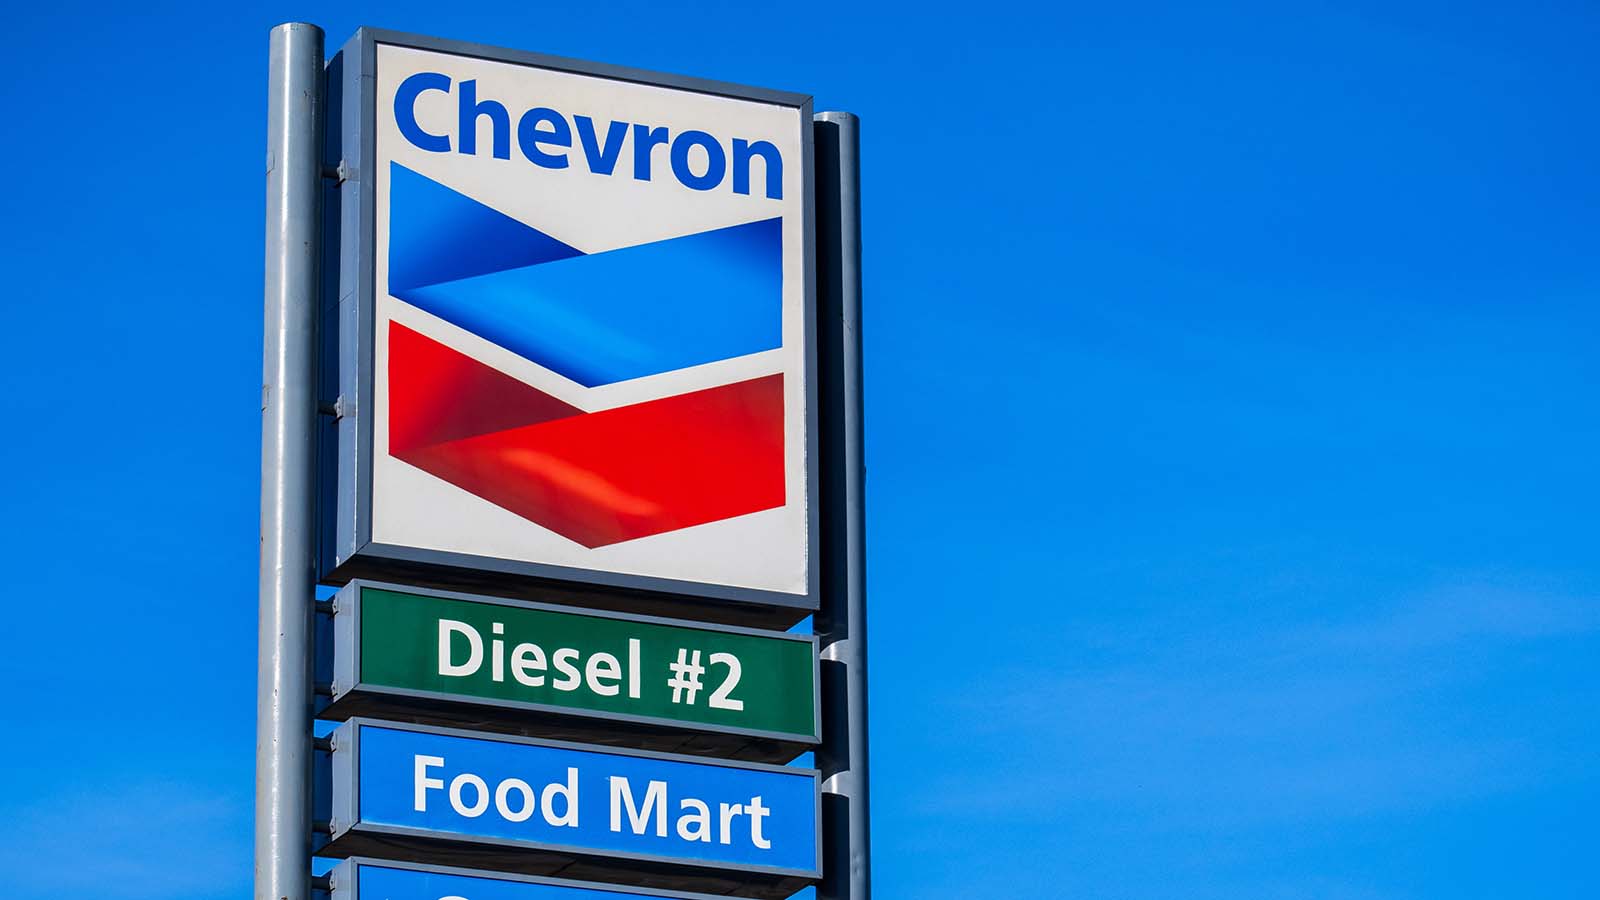 Chevron Stock Shows Just How Much the World Has Changed